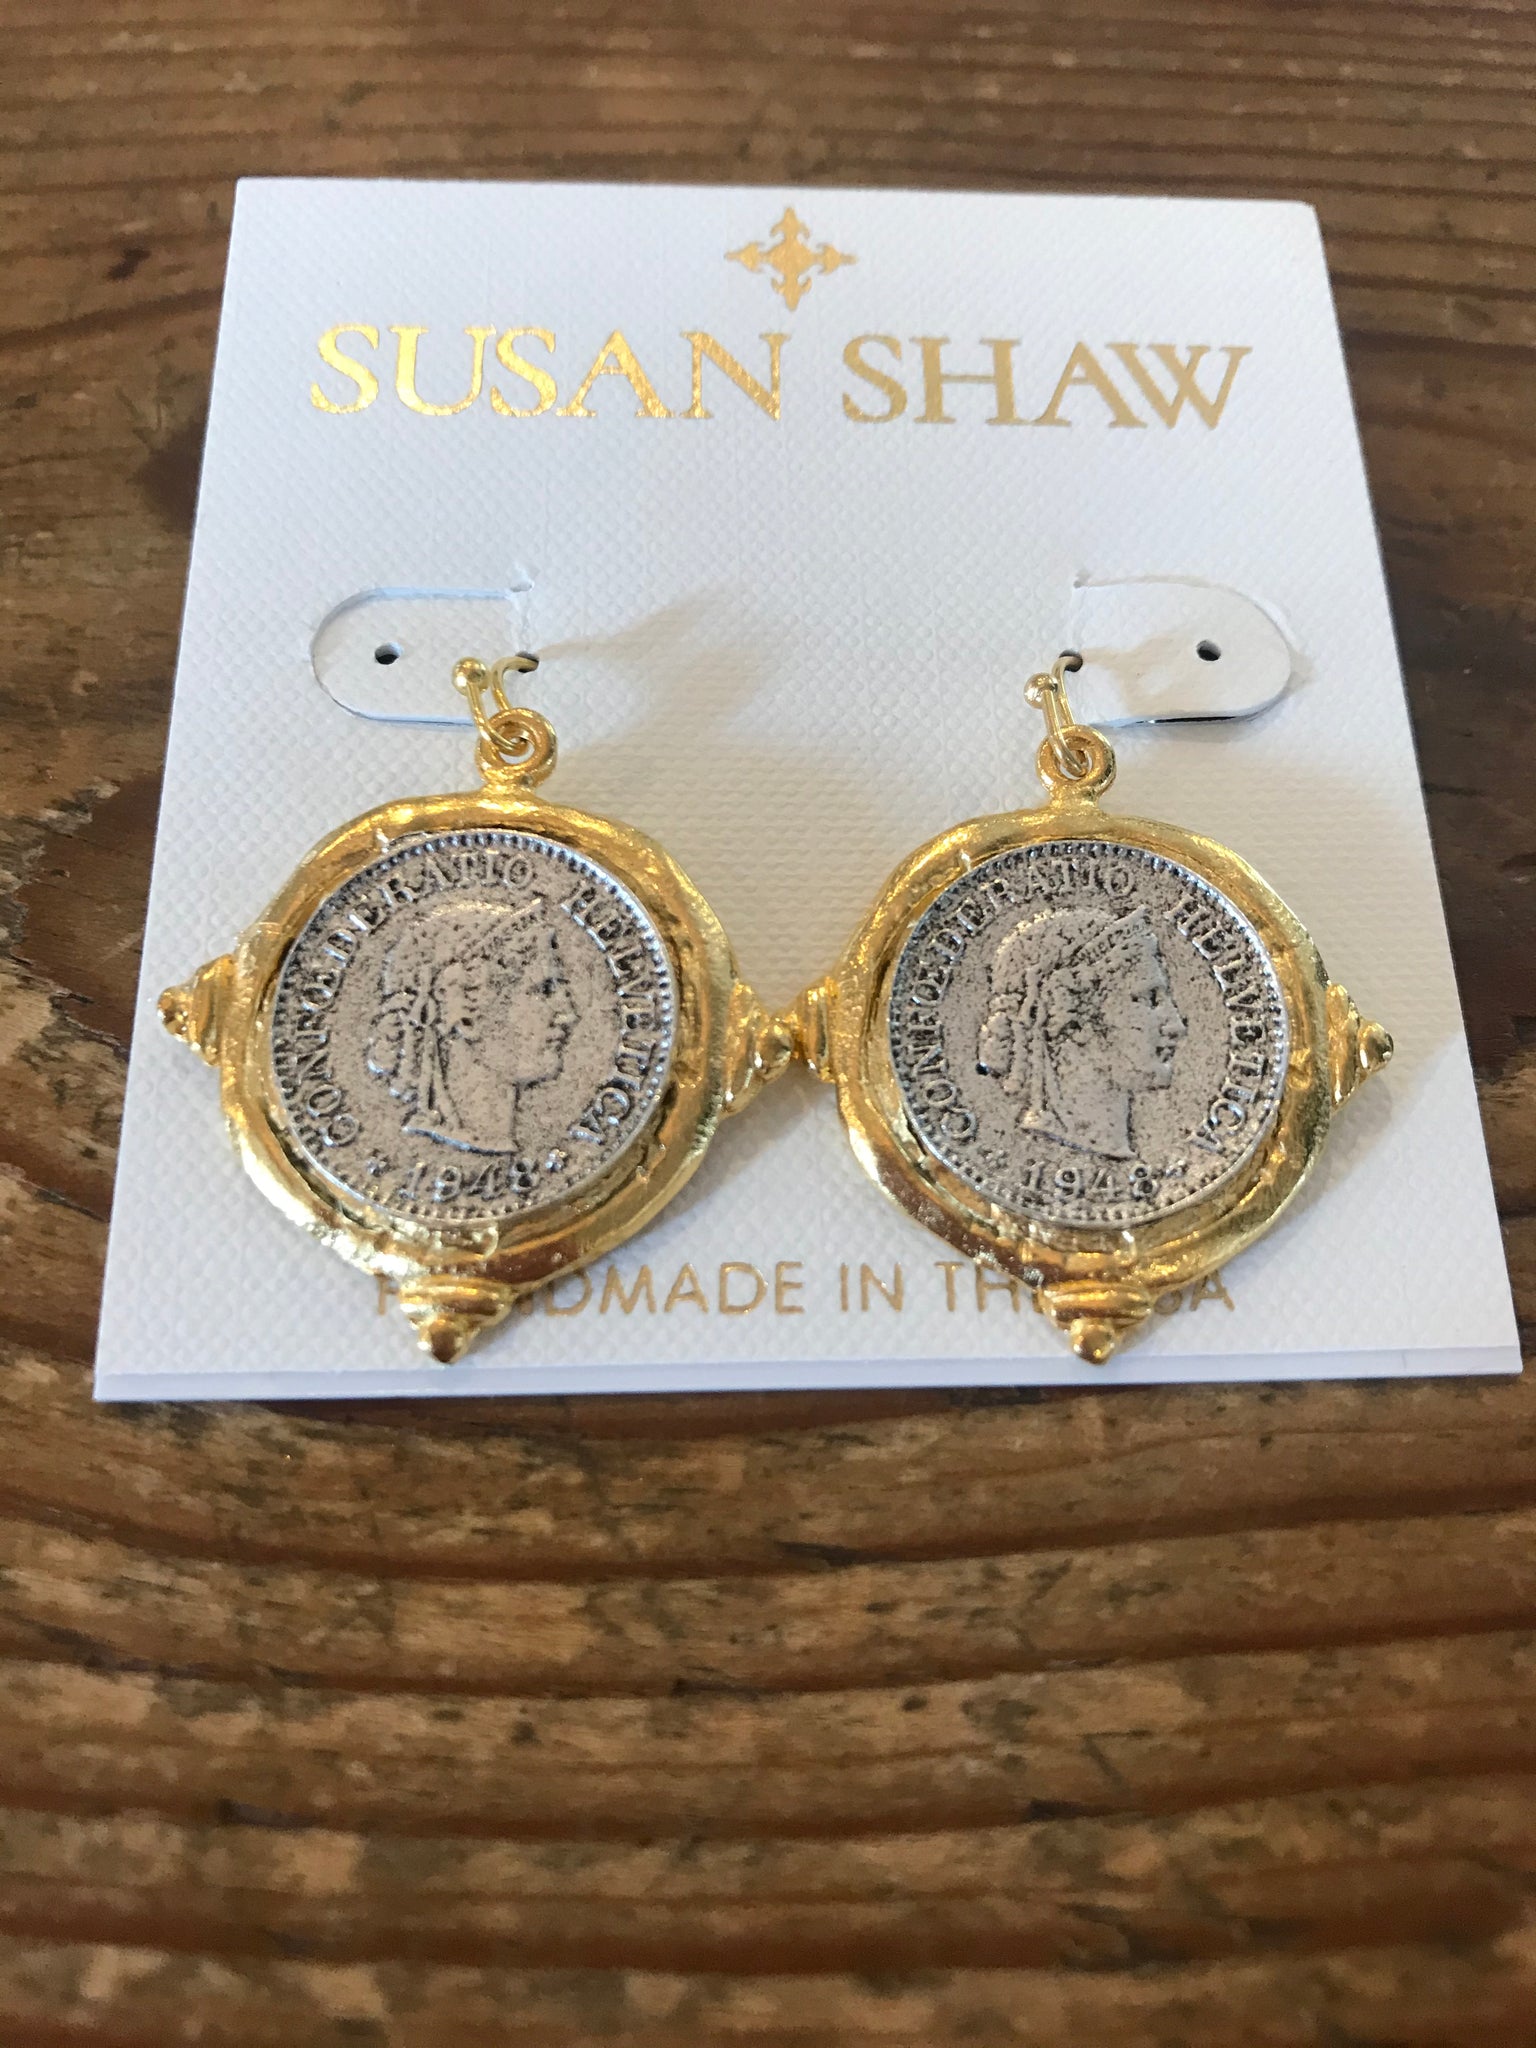 Susan Shaw 1531 Mixed Metal French Franc Coin Earring